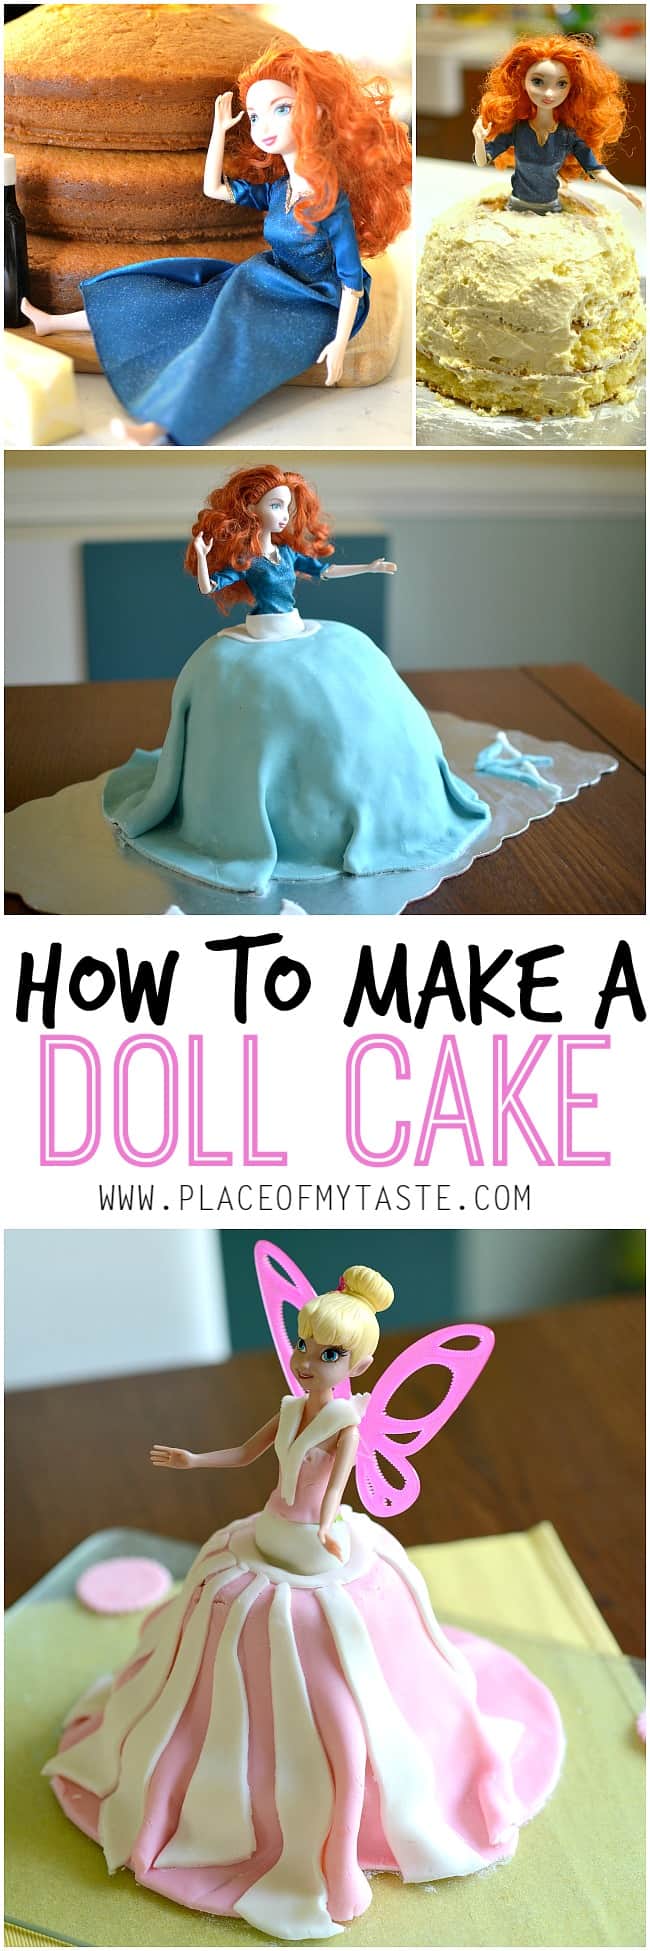 HOW TO MAKE A DOLL CAKE